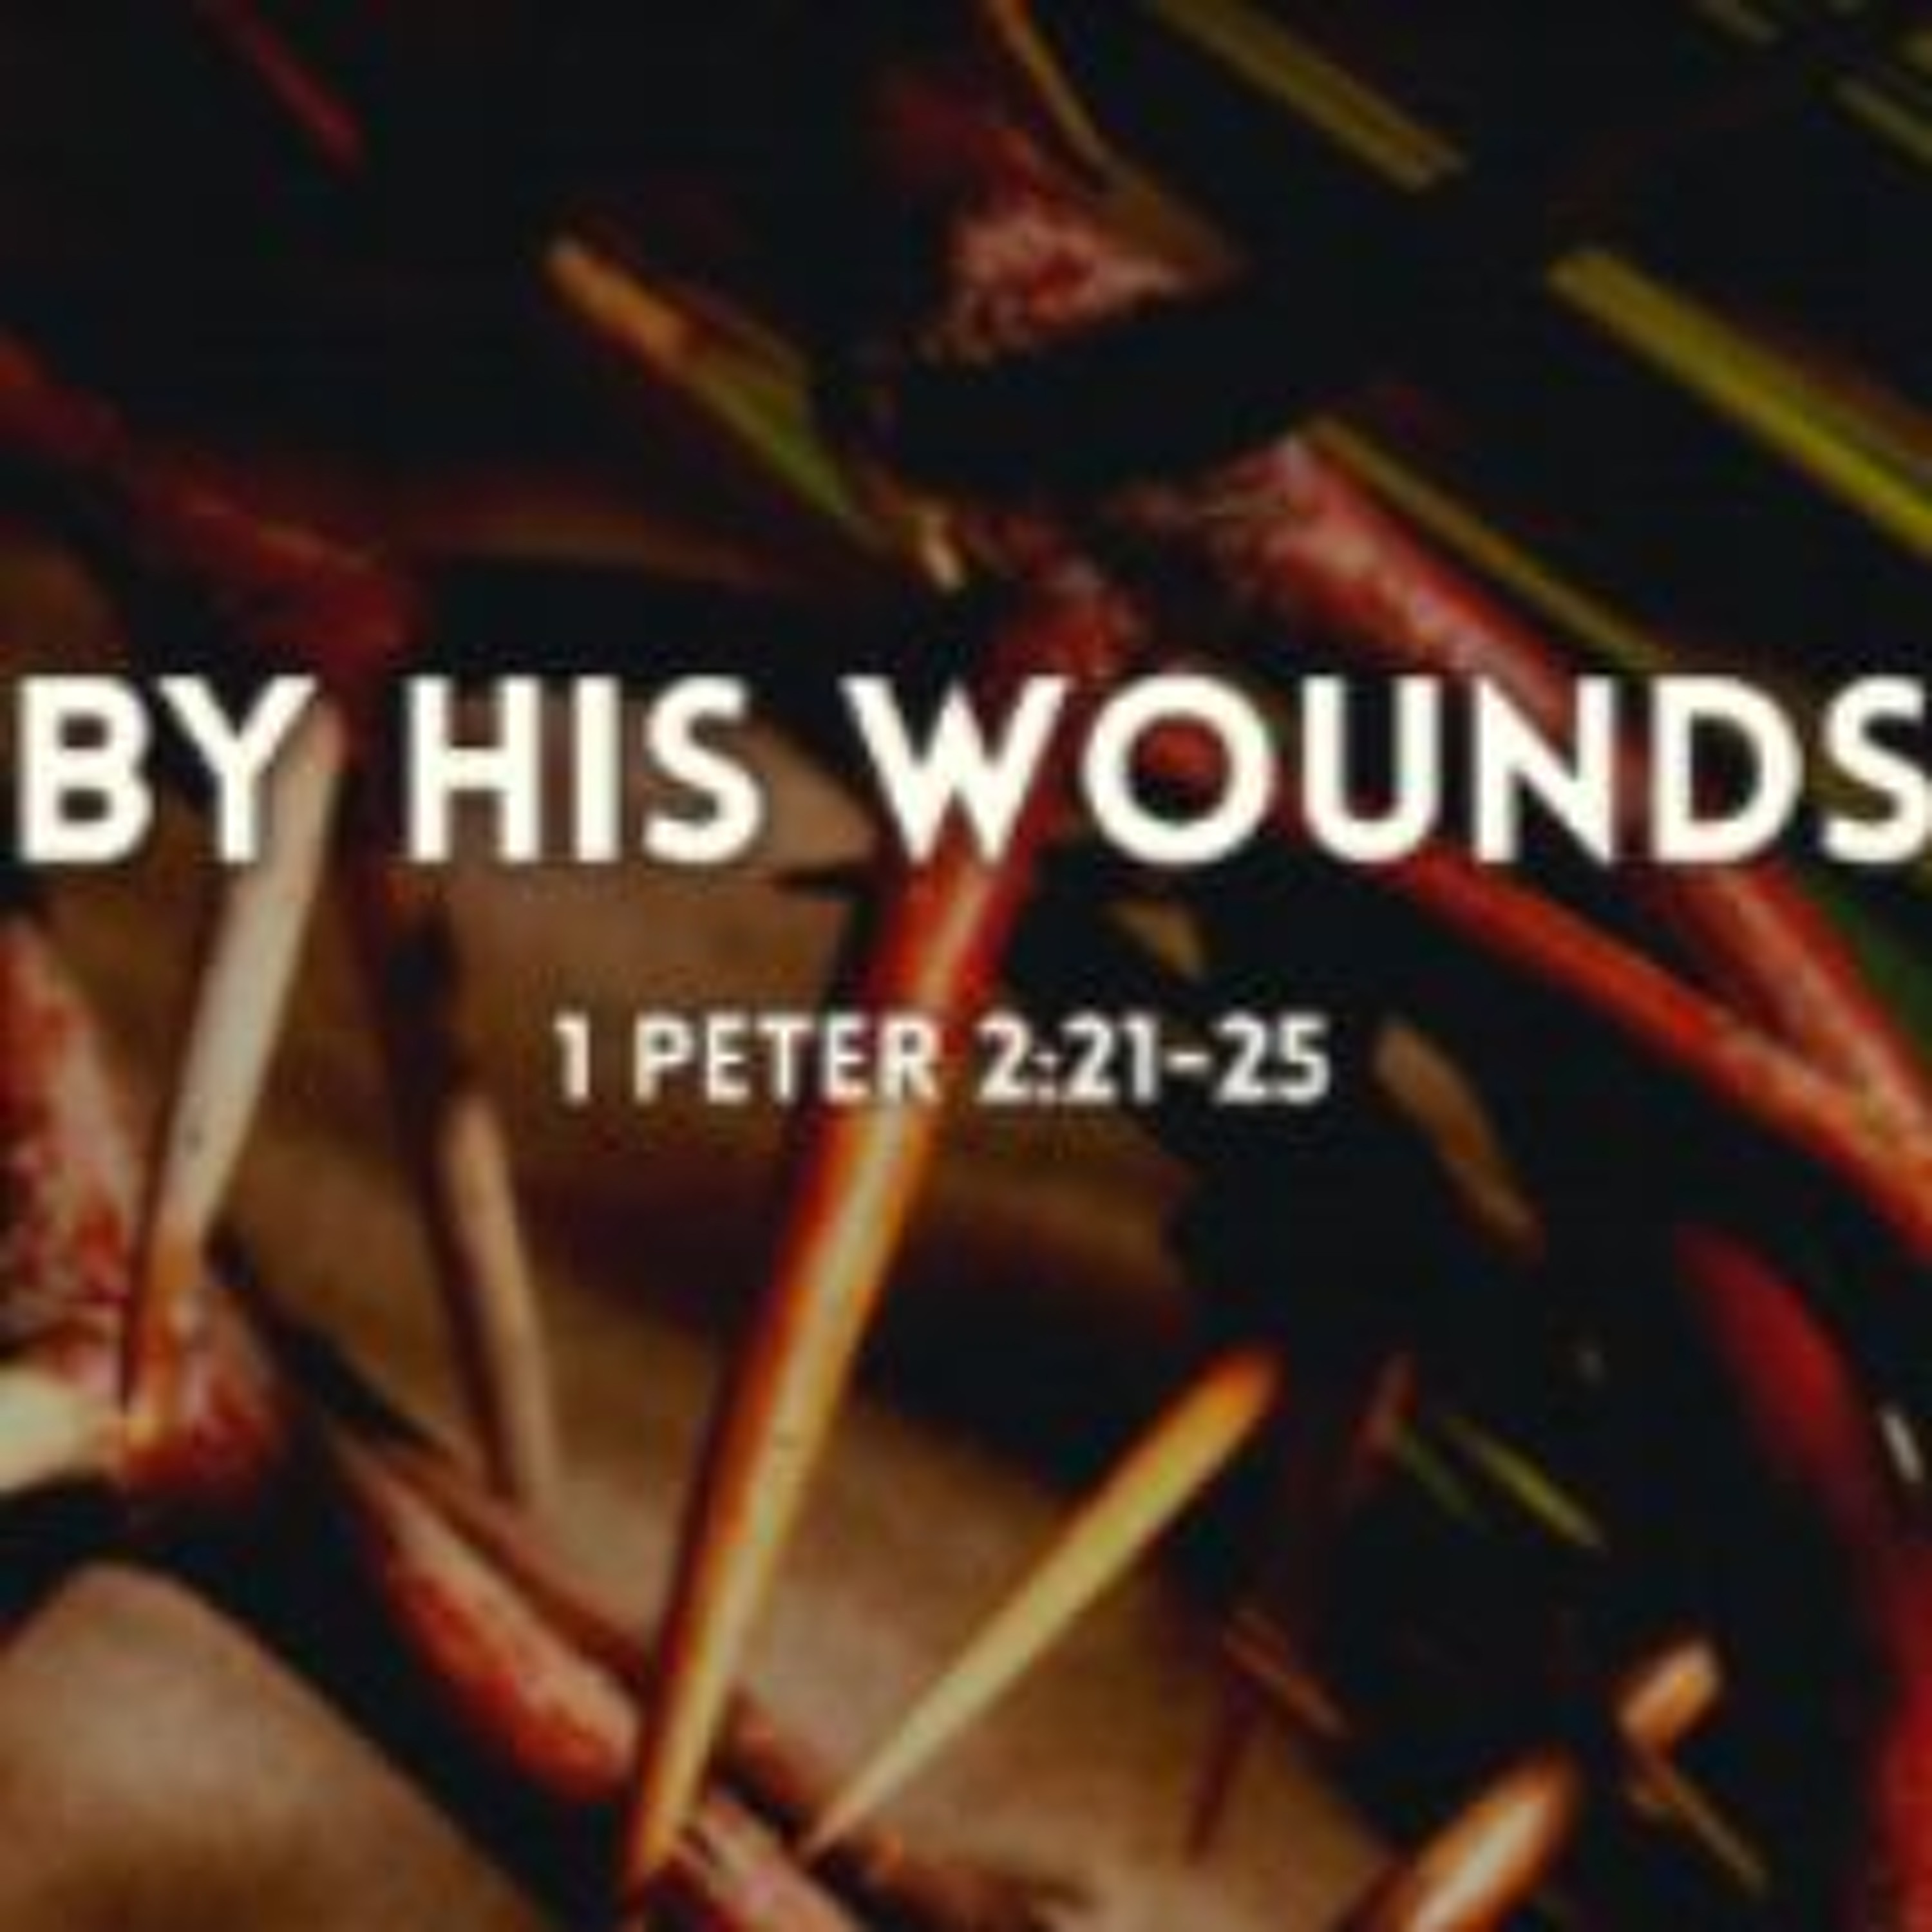 By His Wounds (1 Peter 22:1-5) Good Friday Service